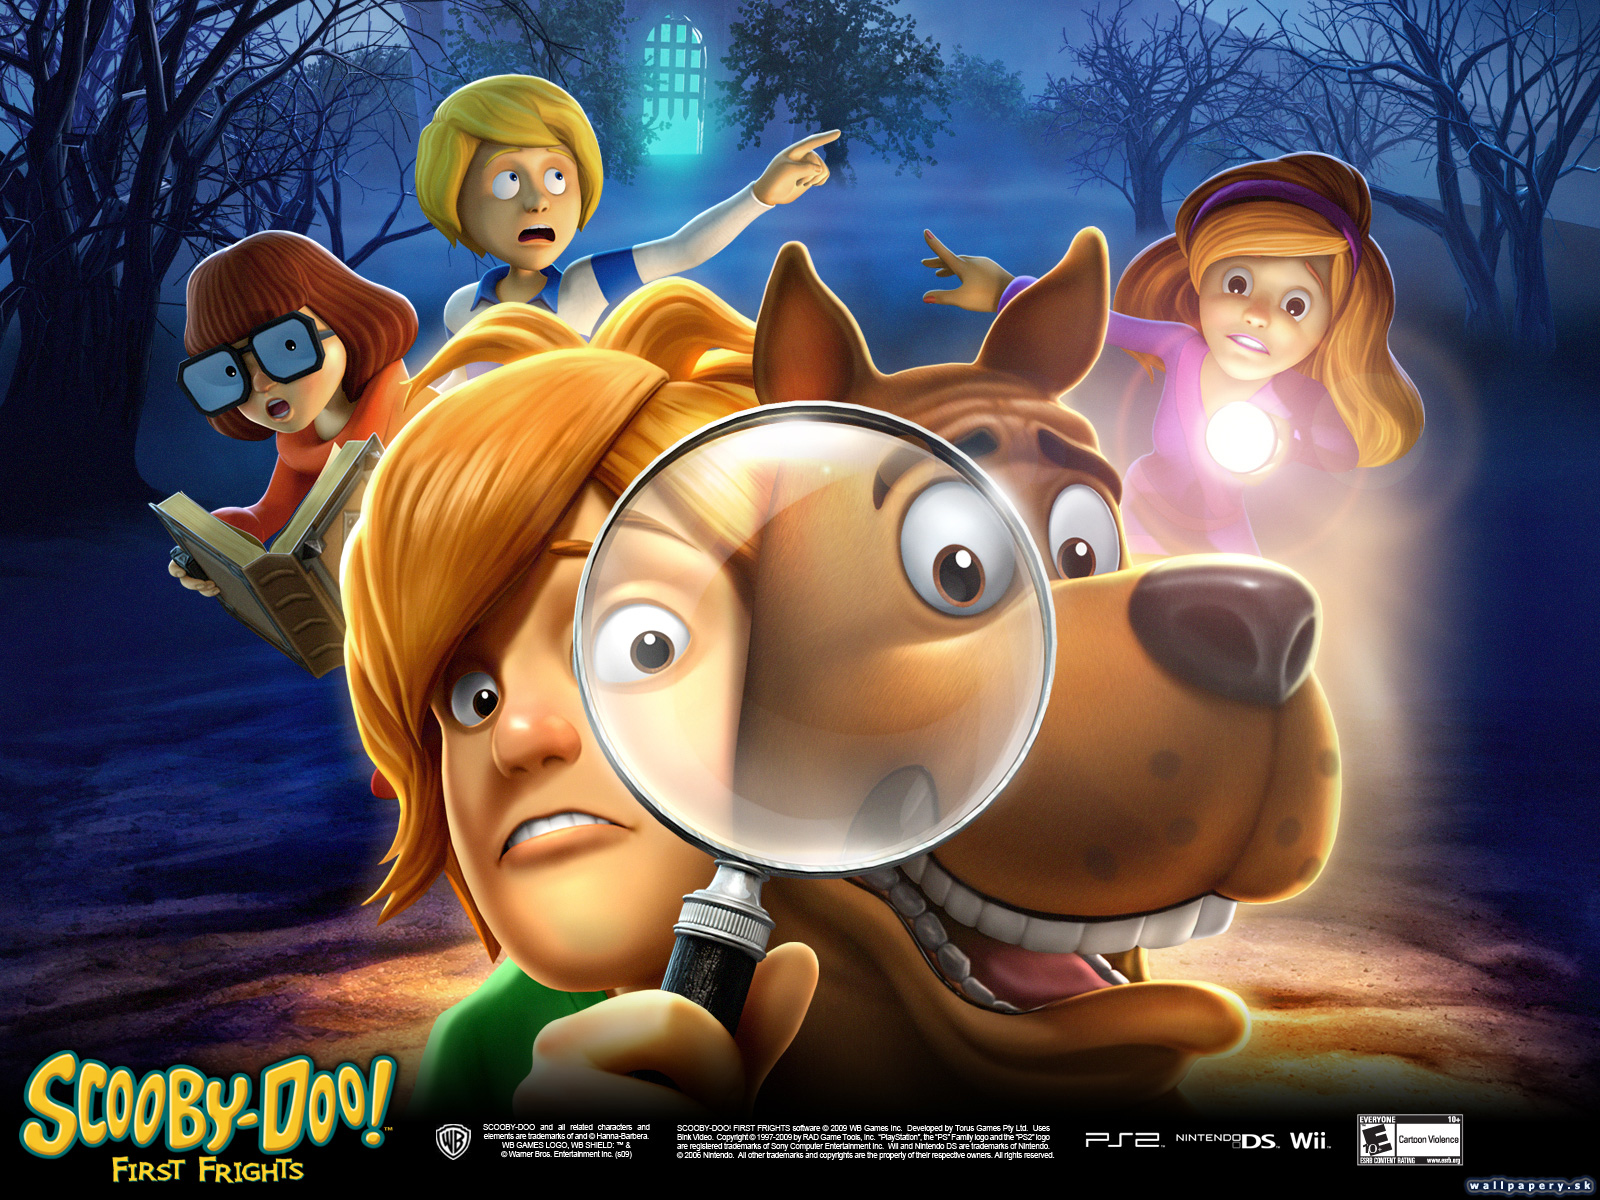 Scooby-Doo! First Frights - wallpaper 1